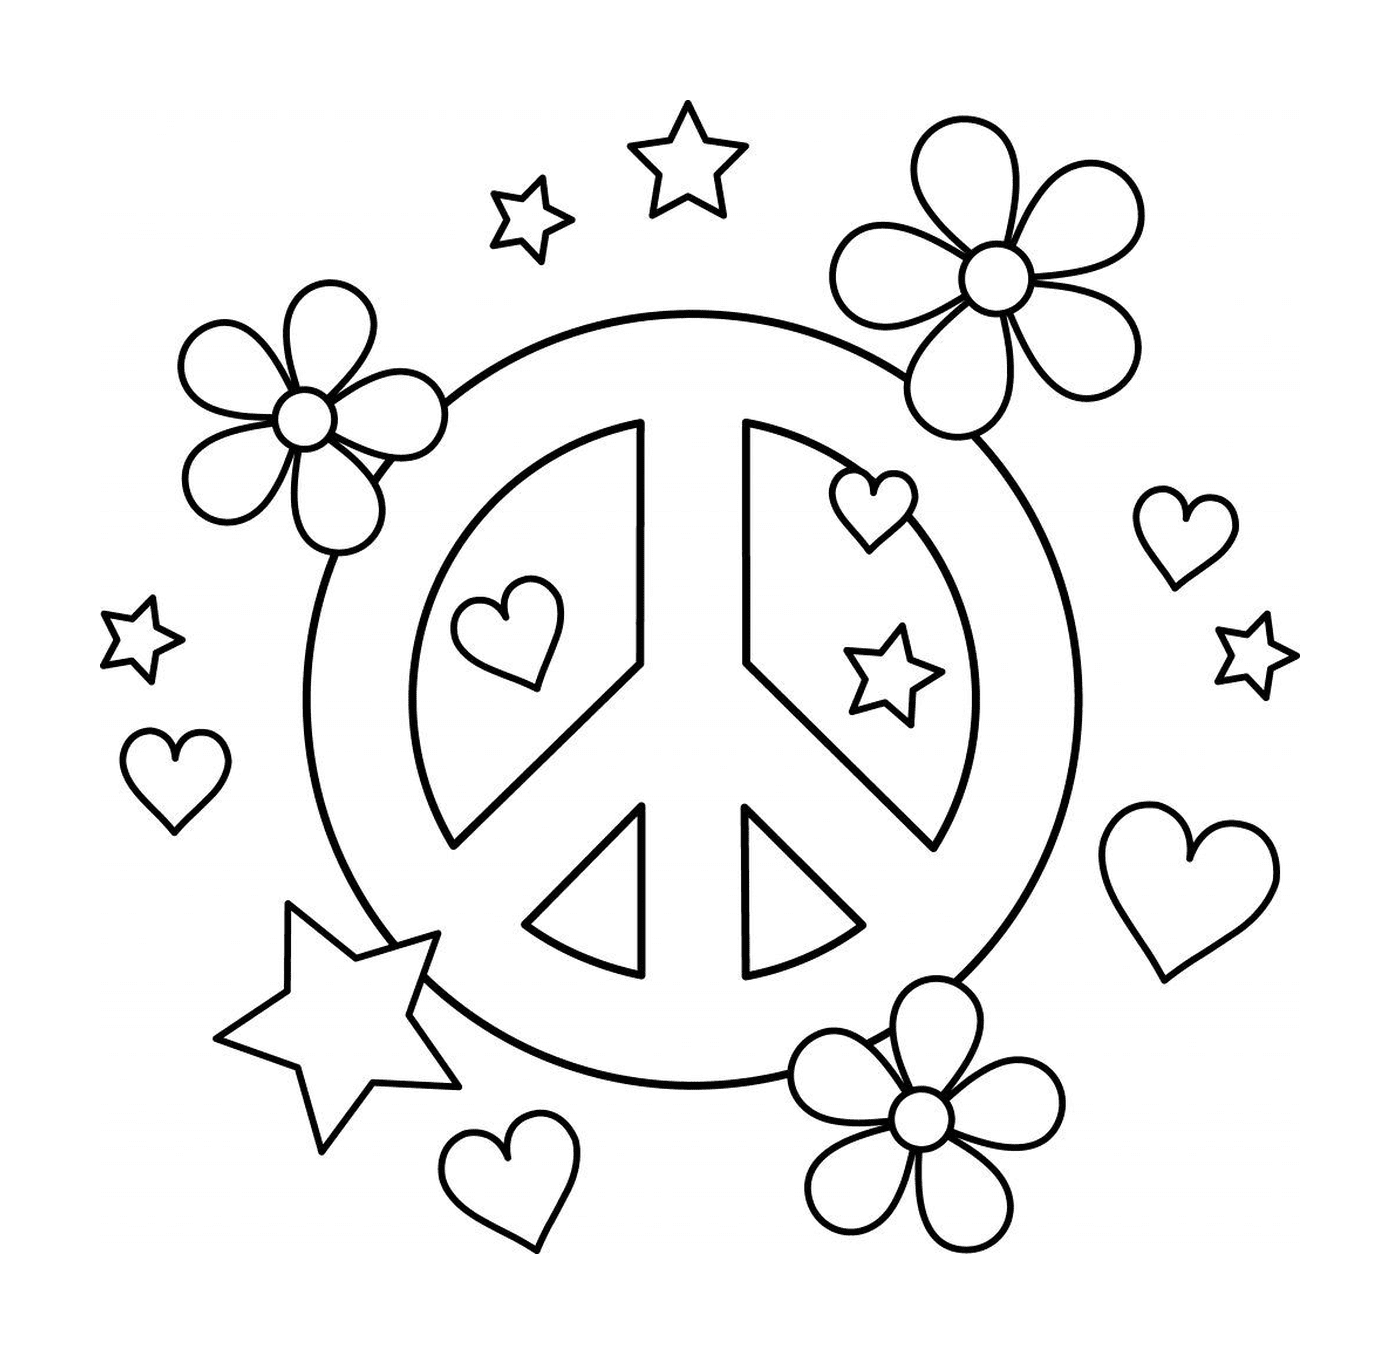  Peace symbol with hearts and flowers 